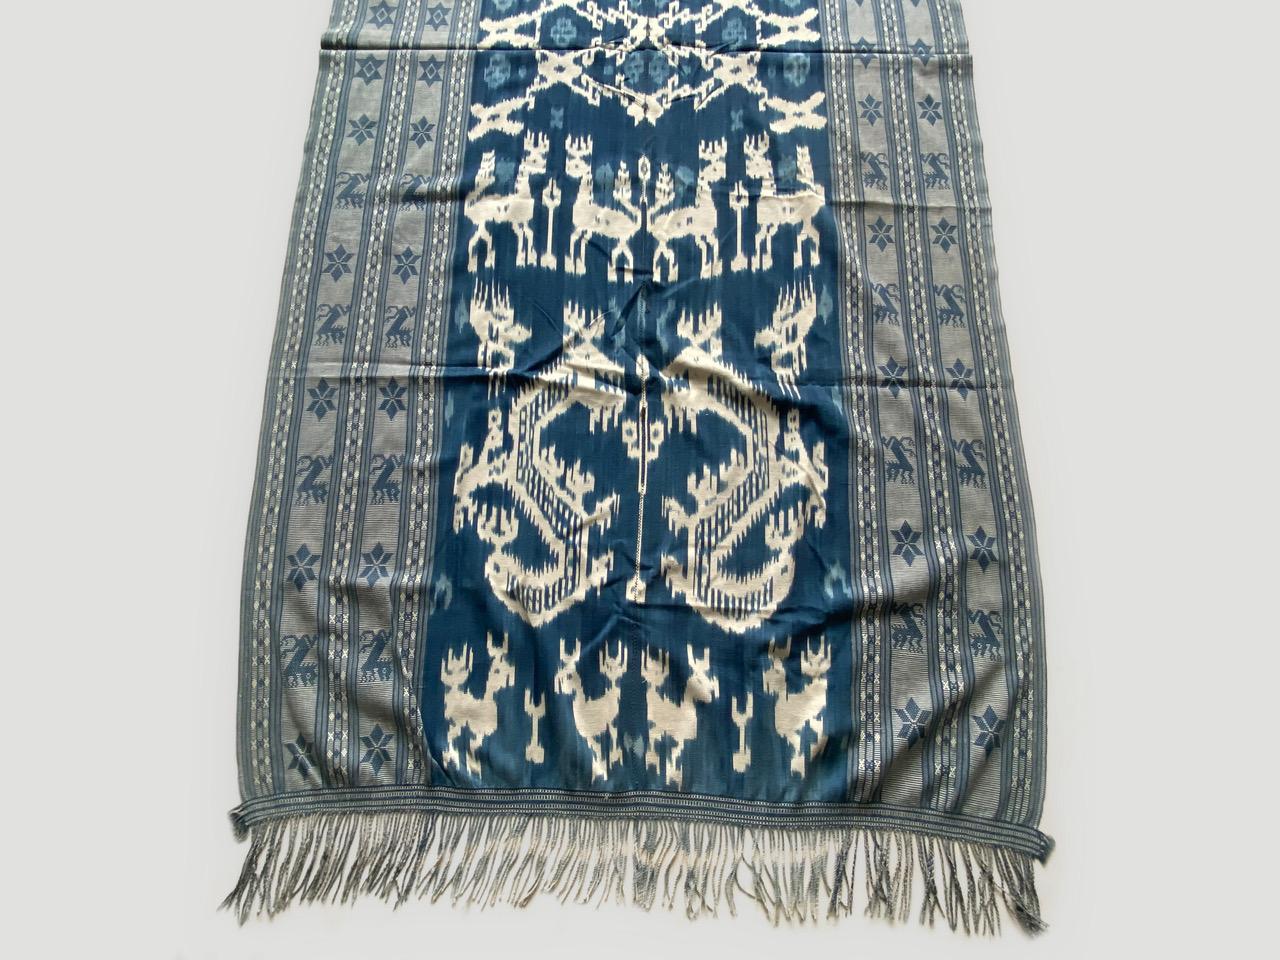 Beautiful antique indigo Ikat textile, from the island of Sumba. The stripes and stars seem modern, yet mixed with the traditional motif panel with mythical characters and sea horses, work so well together. On the opposite side the weave is reversed